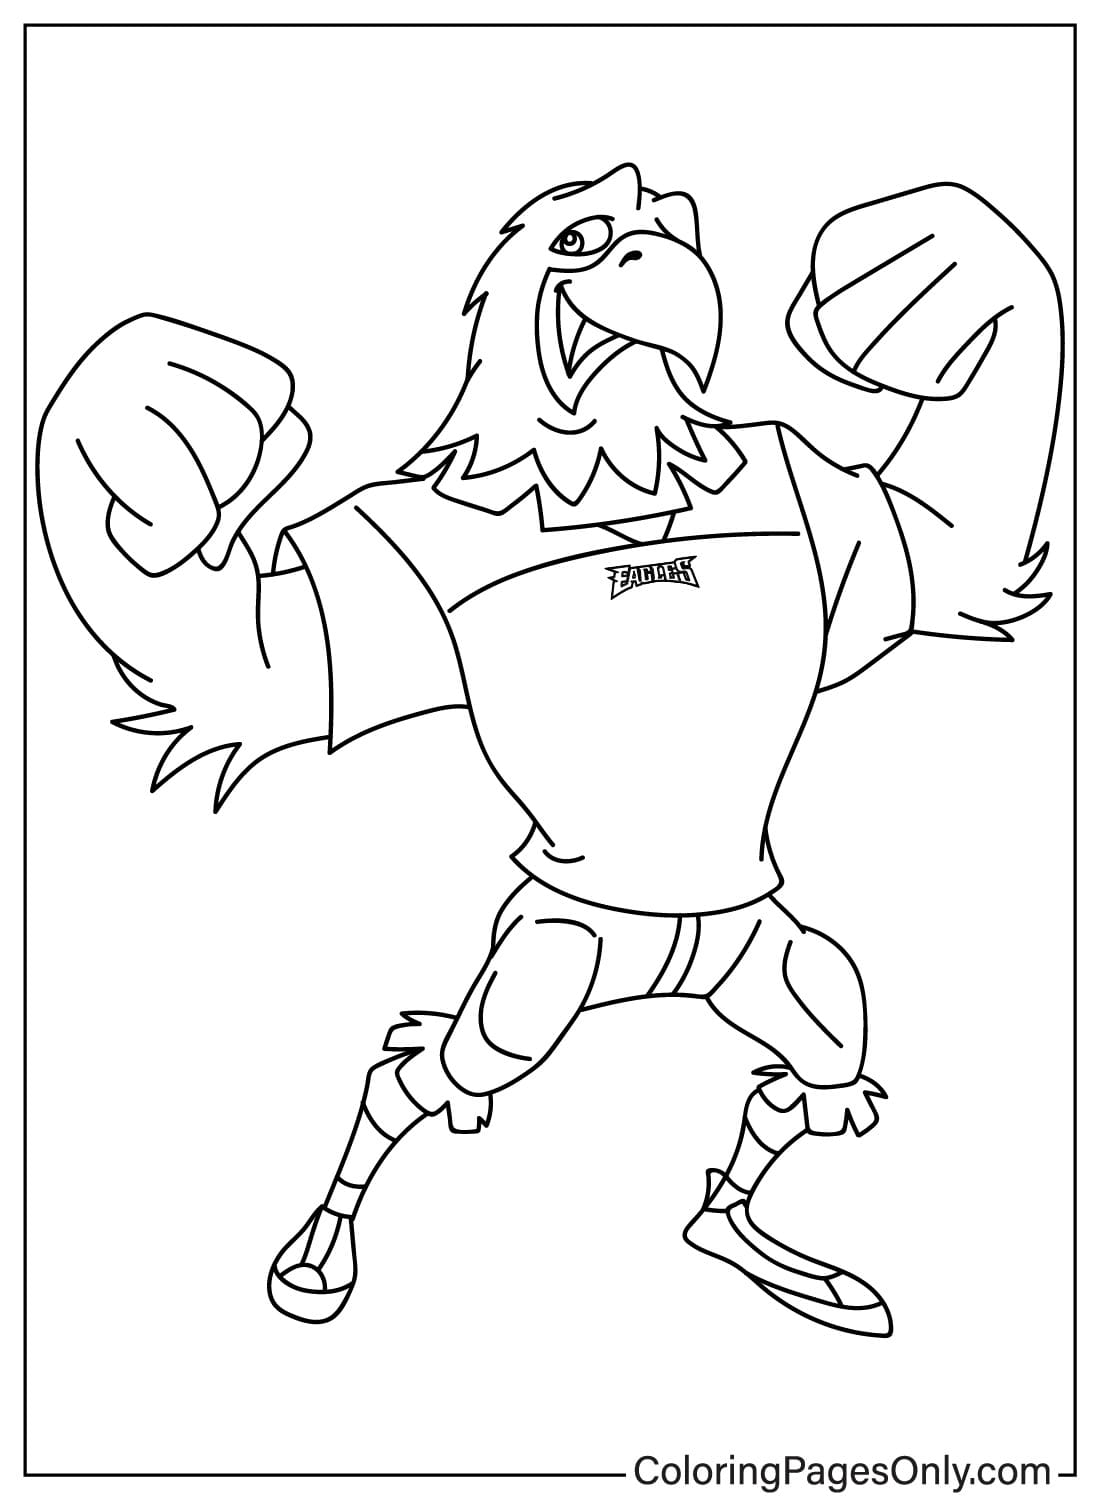 Mascot Swoop Coloring Page Free from Philadelphia Eagles